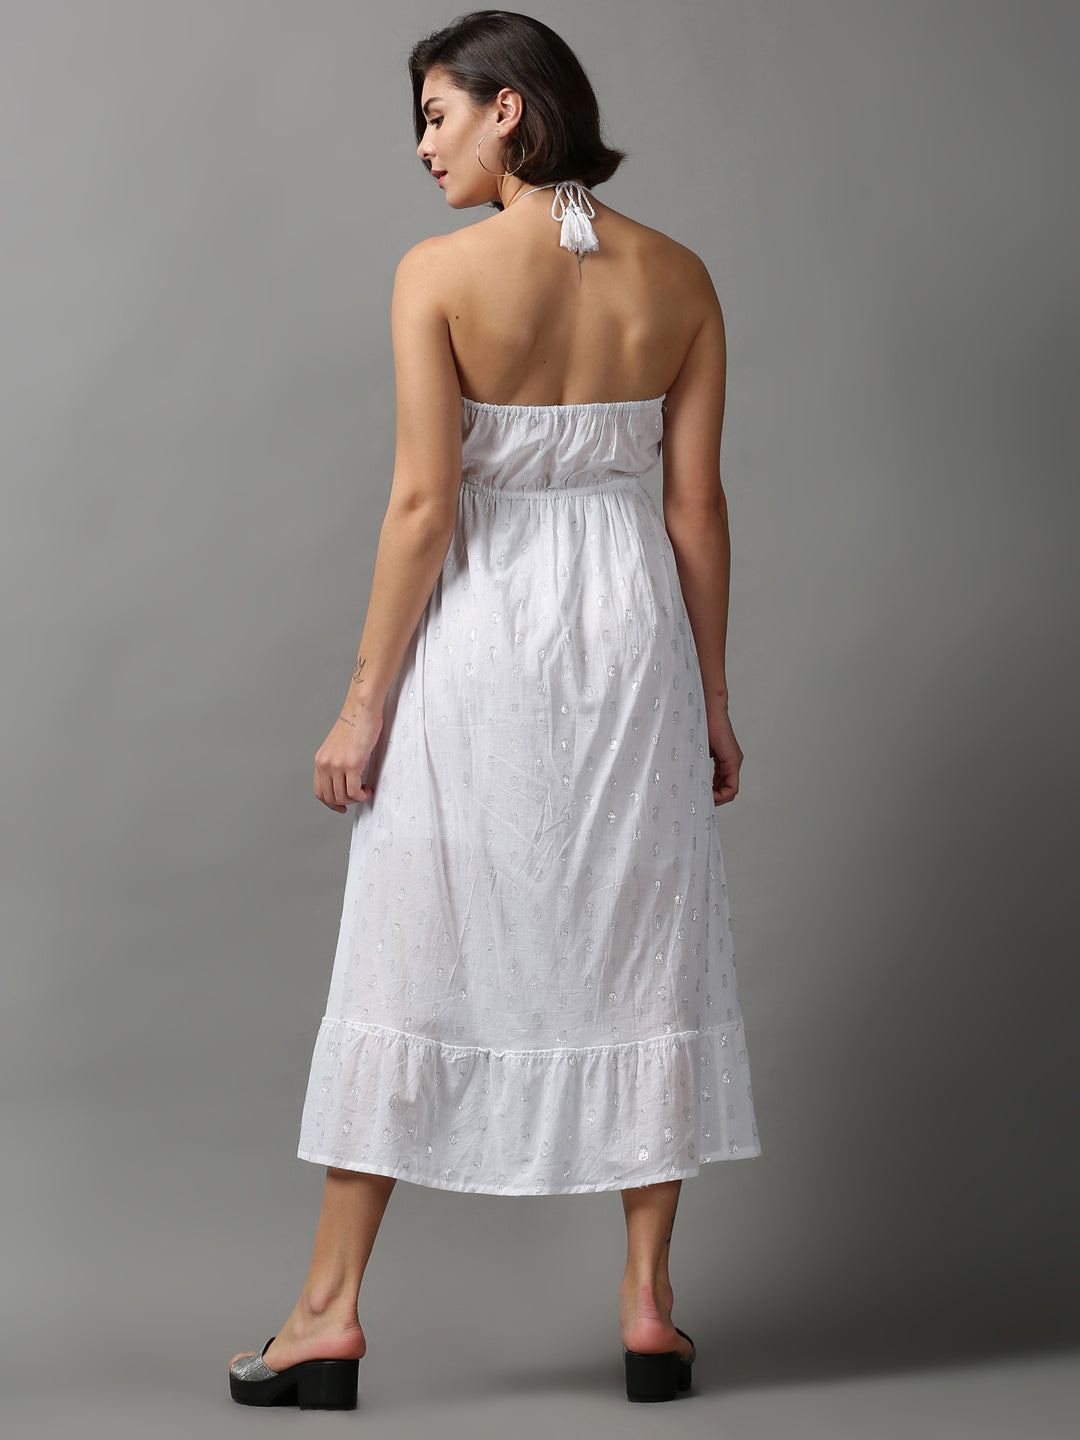 Women's White Solid Fit and Flare Dress